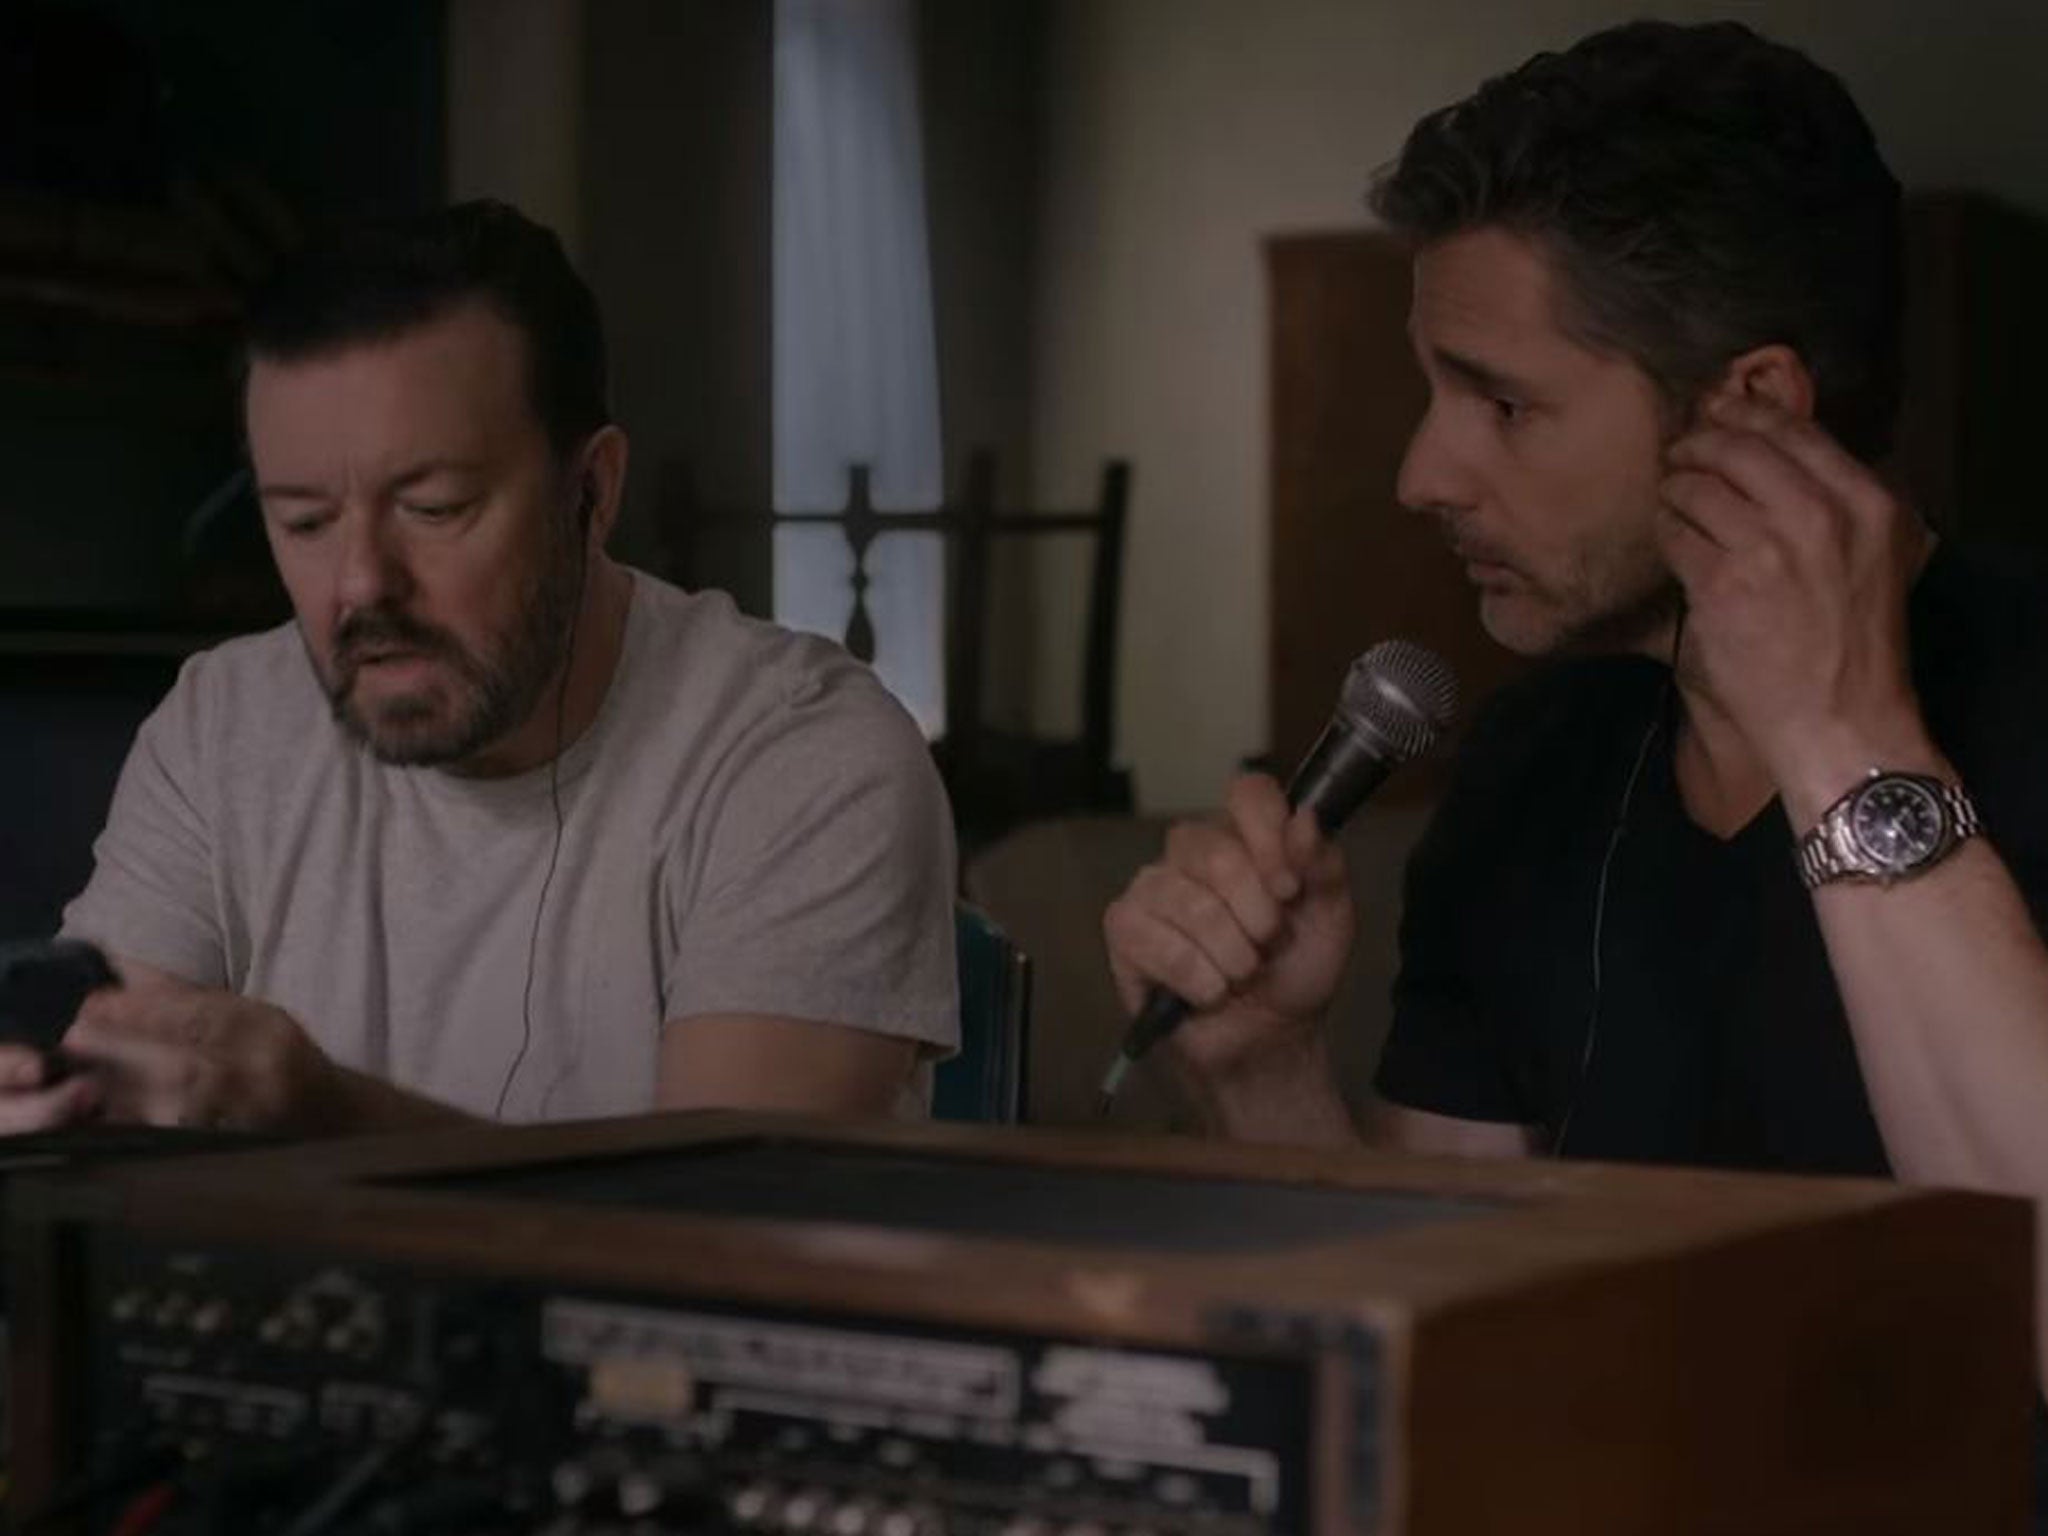 'Special Correspondents' sees Ricky Gervais, left, playing a sound engineer for Eric Bana's arrogant radio journalist